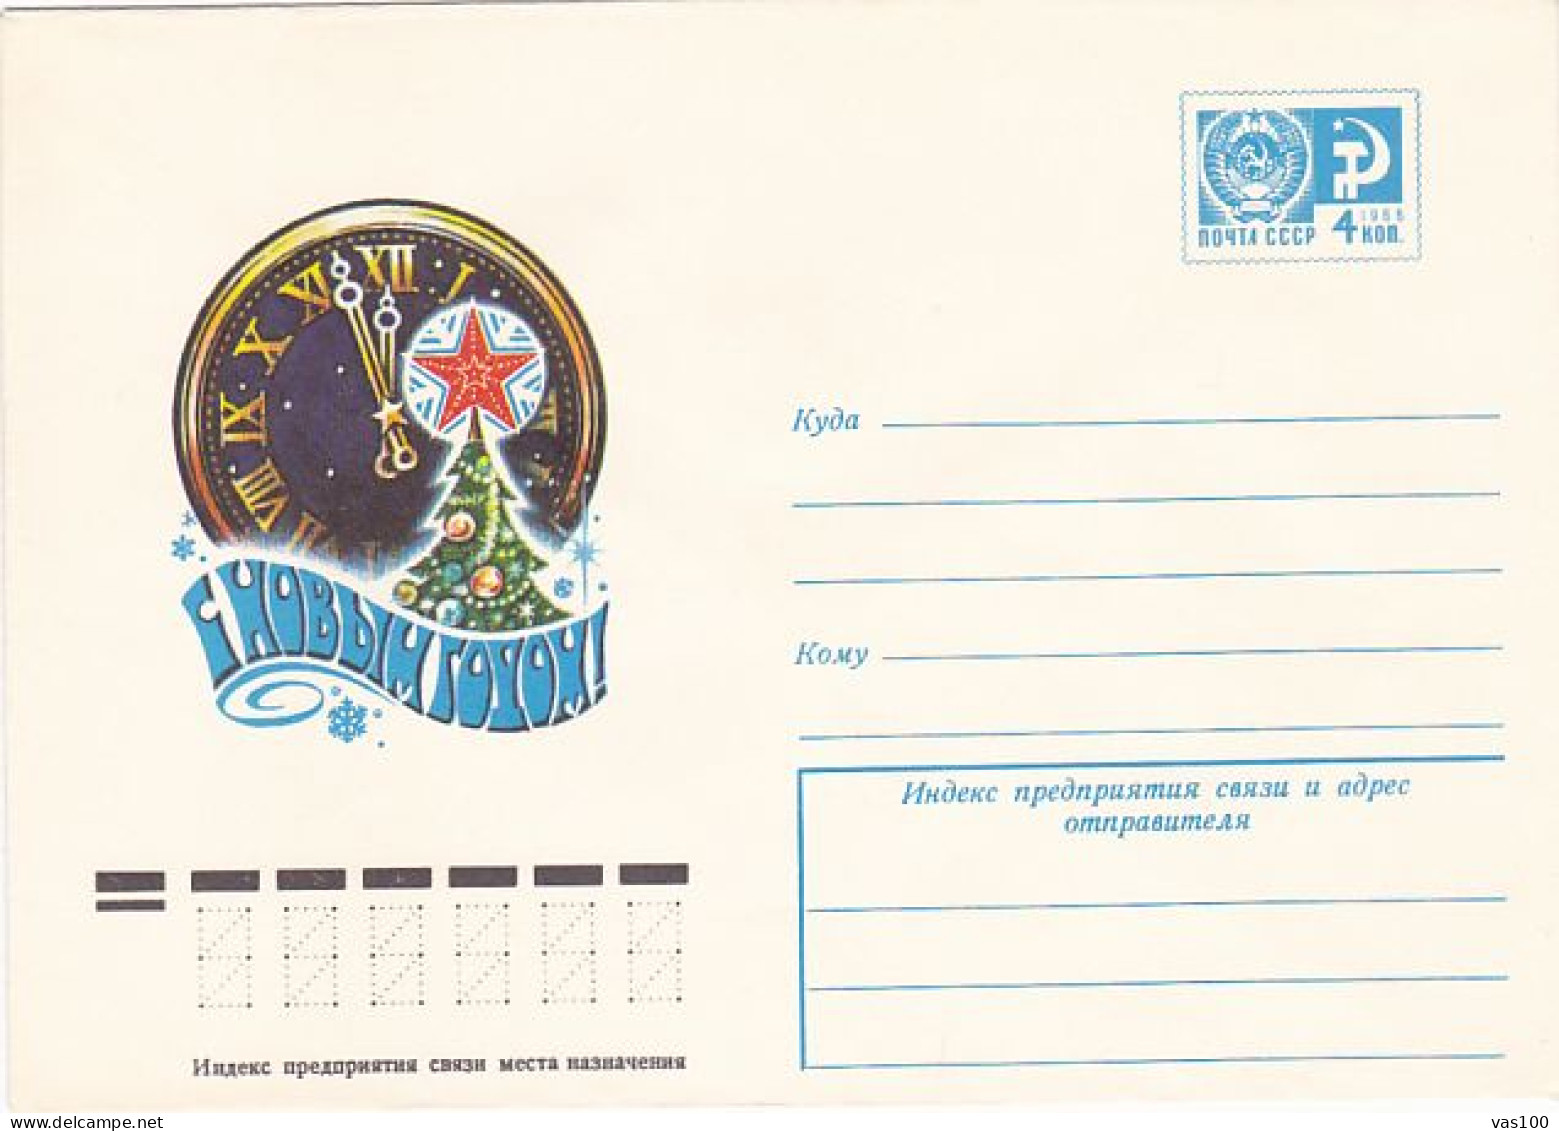 CLOCKS, NEW YEAR, COVER STATIONERY, ENTIER POSTAL, 1976, RUSSIA - Horlogerie